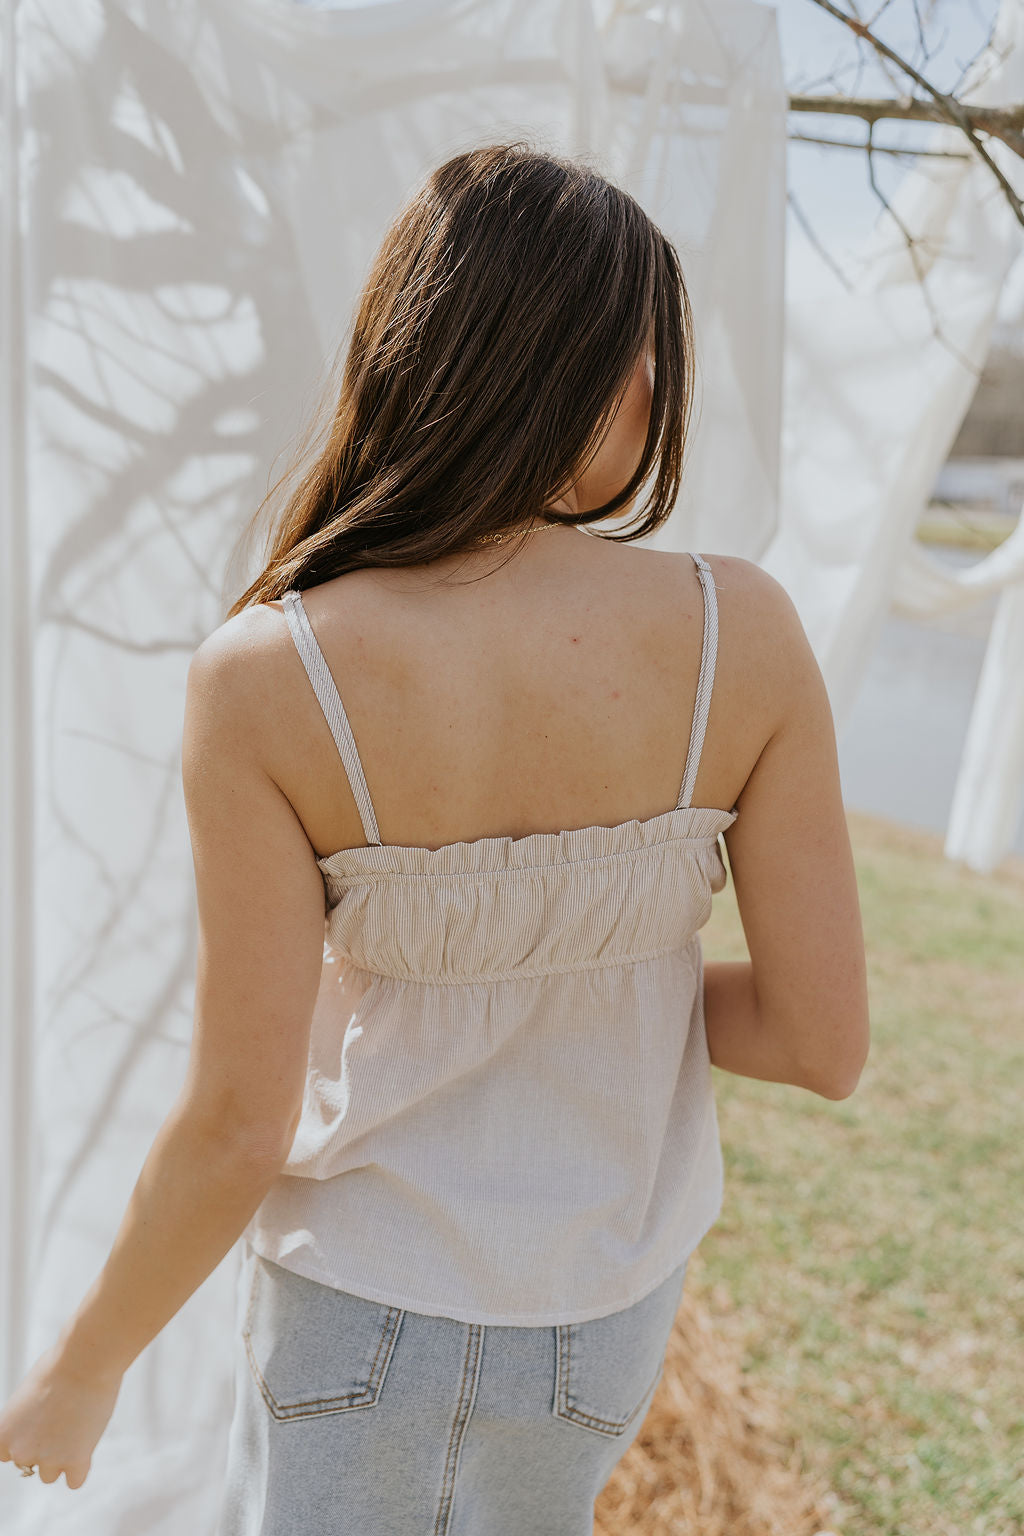 Back view of female model wearing the Billie White & Taupe Striped Tank that has thin vertical stripes, front tie details, ruffle trim, and spaghetti straps